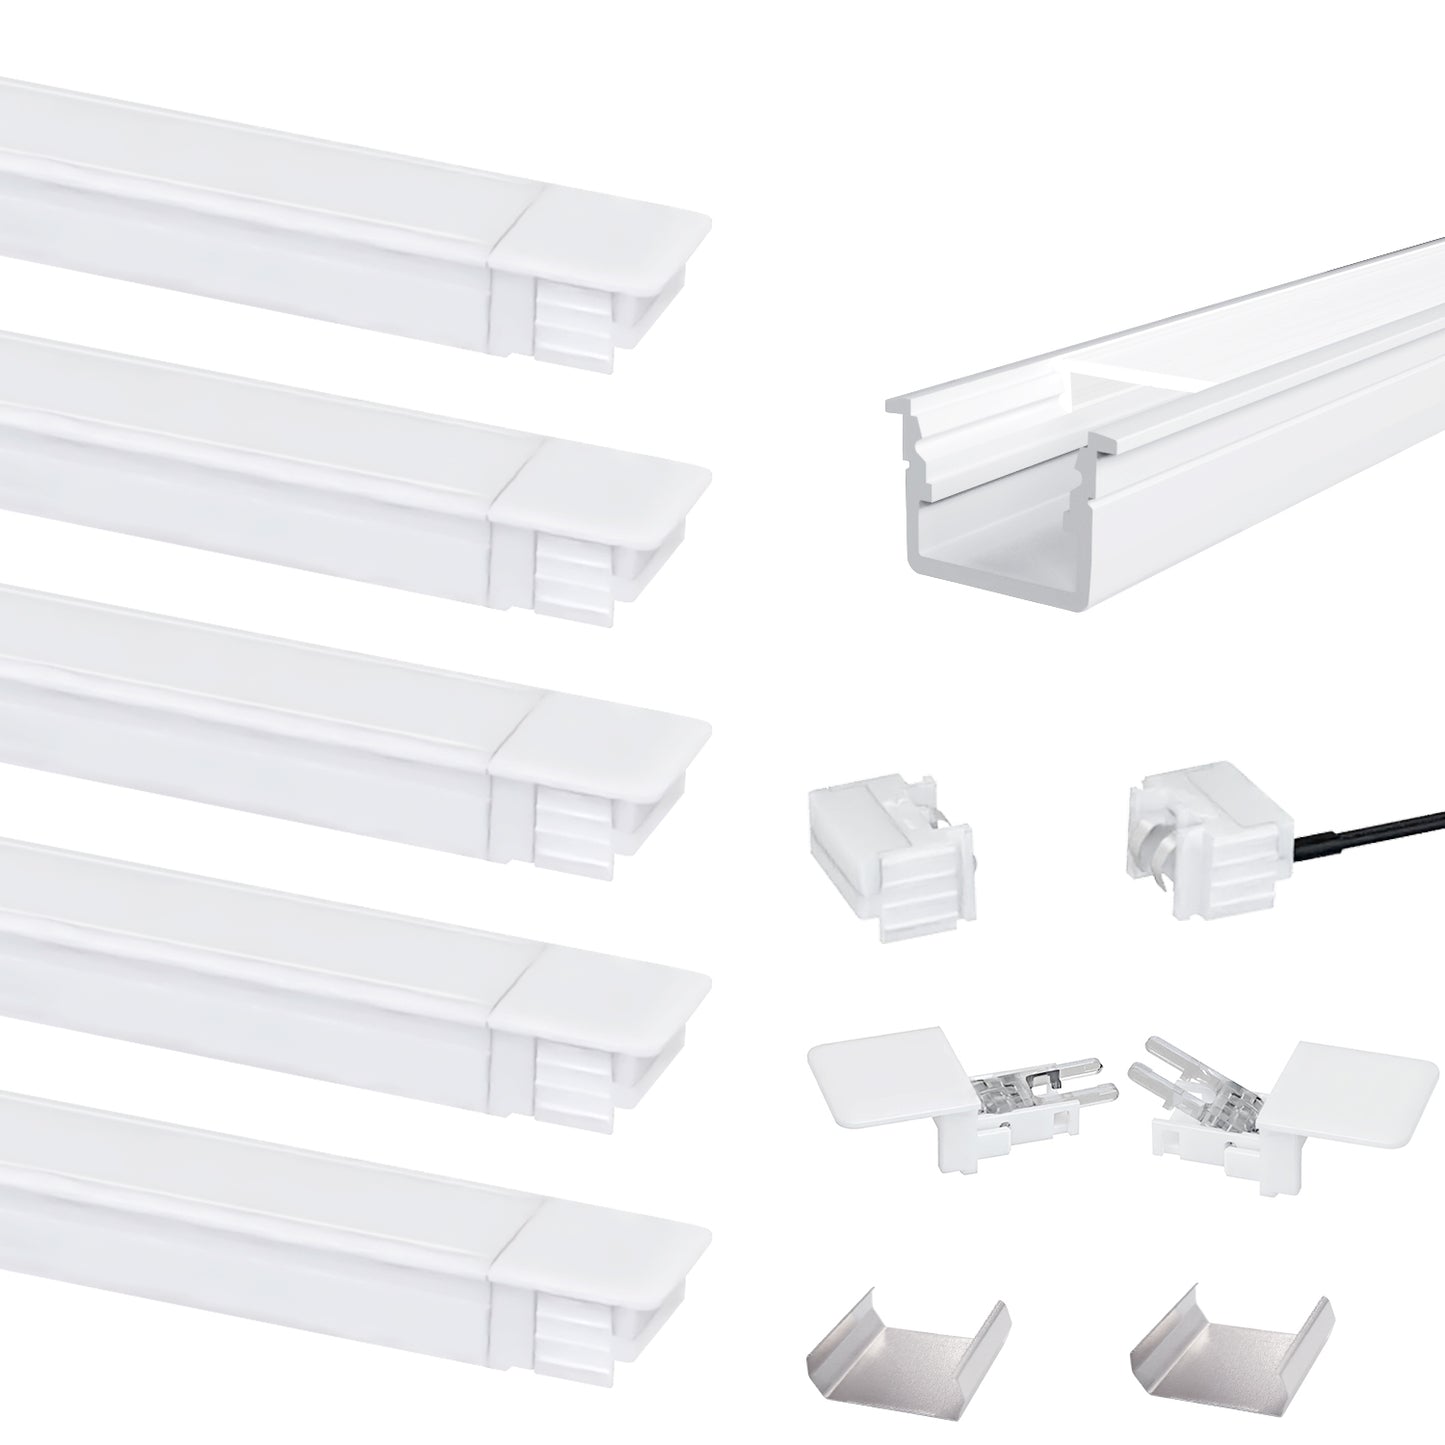 Send an inquiry for  LED Diffuser Channel AL6063 Black Aluminium Extrusion Profiles with Recessed Mounted Design for Strip Light to high quality Aluminium Extrusion Profiles supplier. Wholesale LED Diffuser Channel directly from China Aluminium Extrusion Profiles manufacturers/exporters. Get a factory sale price list and become a distributor/agent-vstled.com